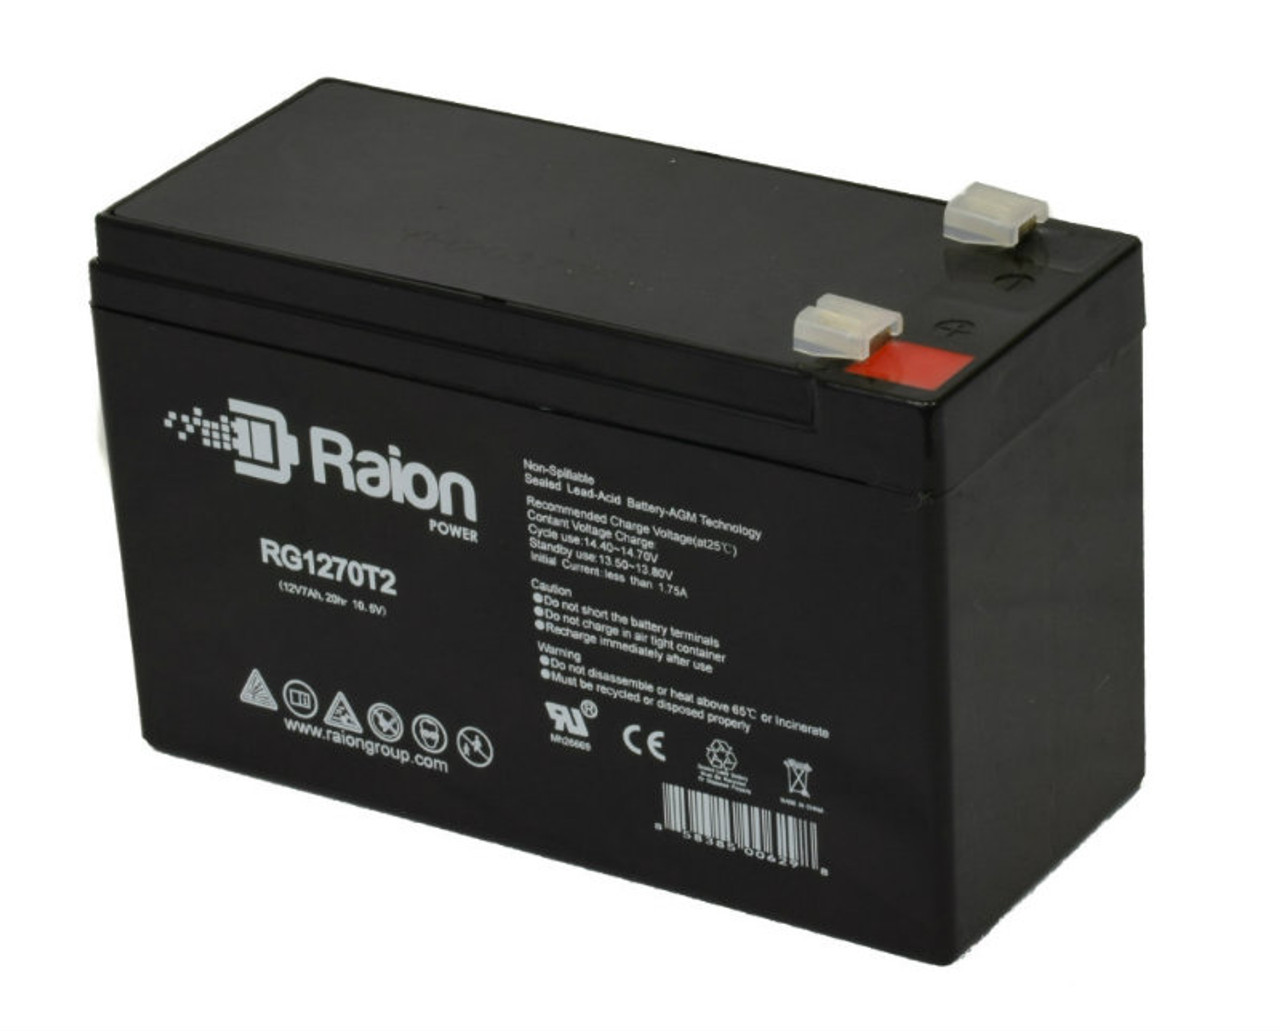 Raion Power RG1270T1 12V 7Ah Non-Spillable Replacement Battery for Newmax PNB1272